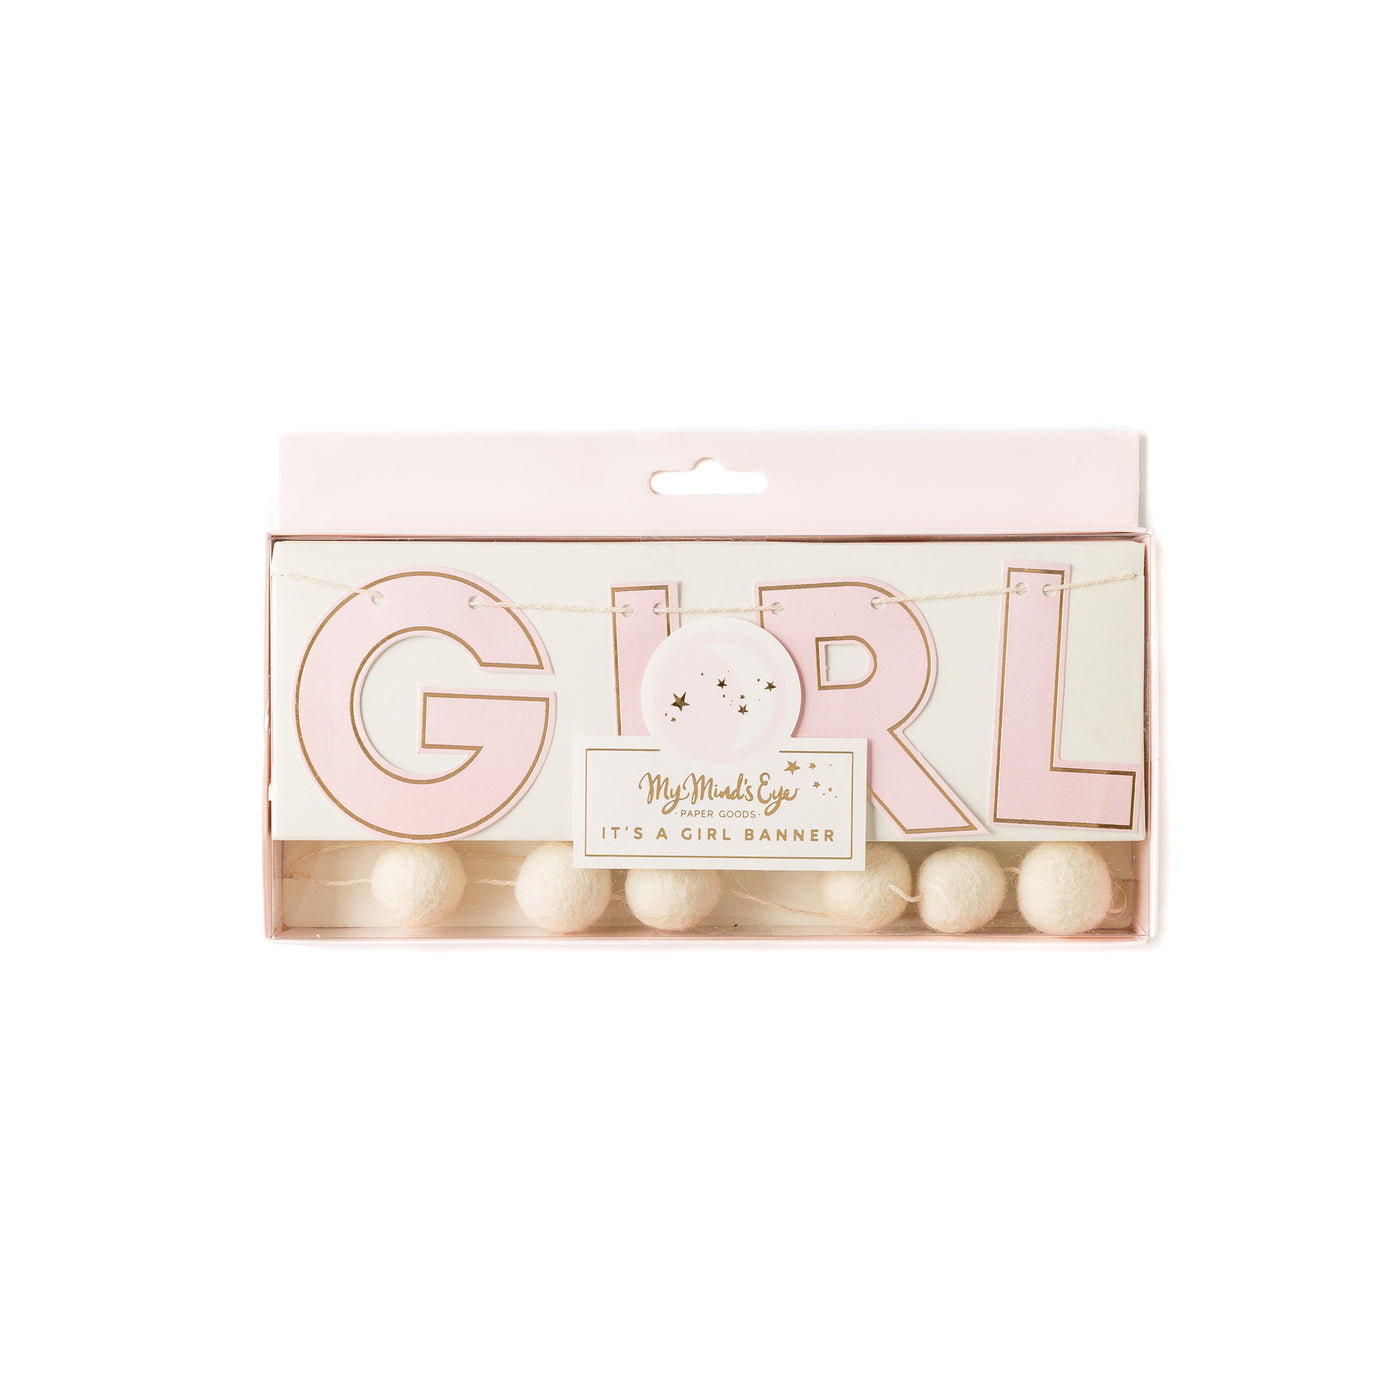 It's a GIRL Banner - My Mind's Eye Paper Goods